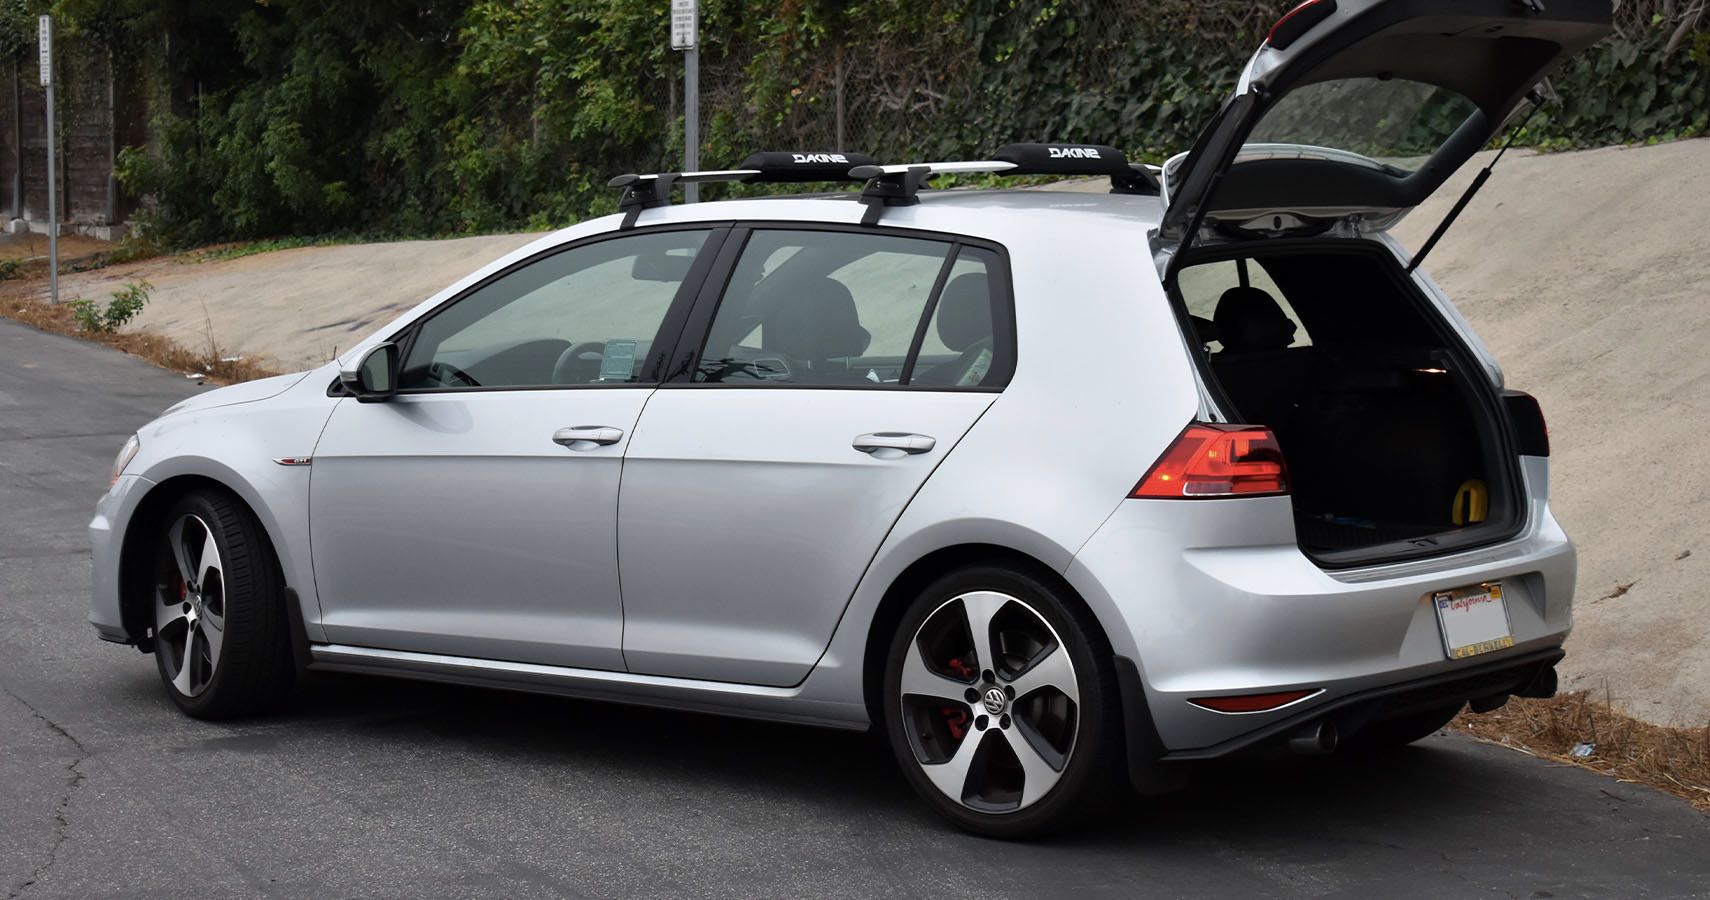 Review: The Volkswagen GTI Doesn't Deserve A Dual-Clutch Gearbox